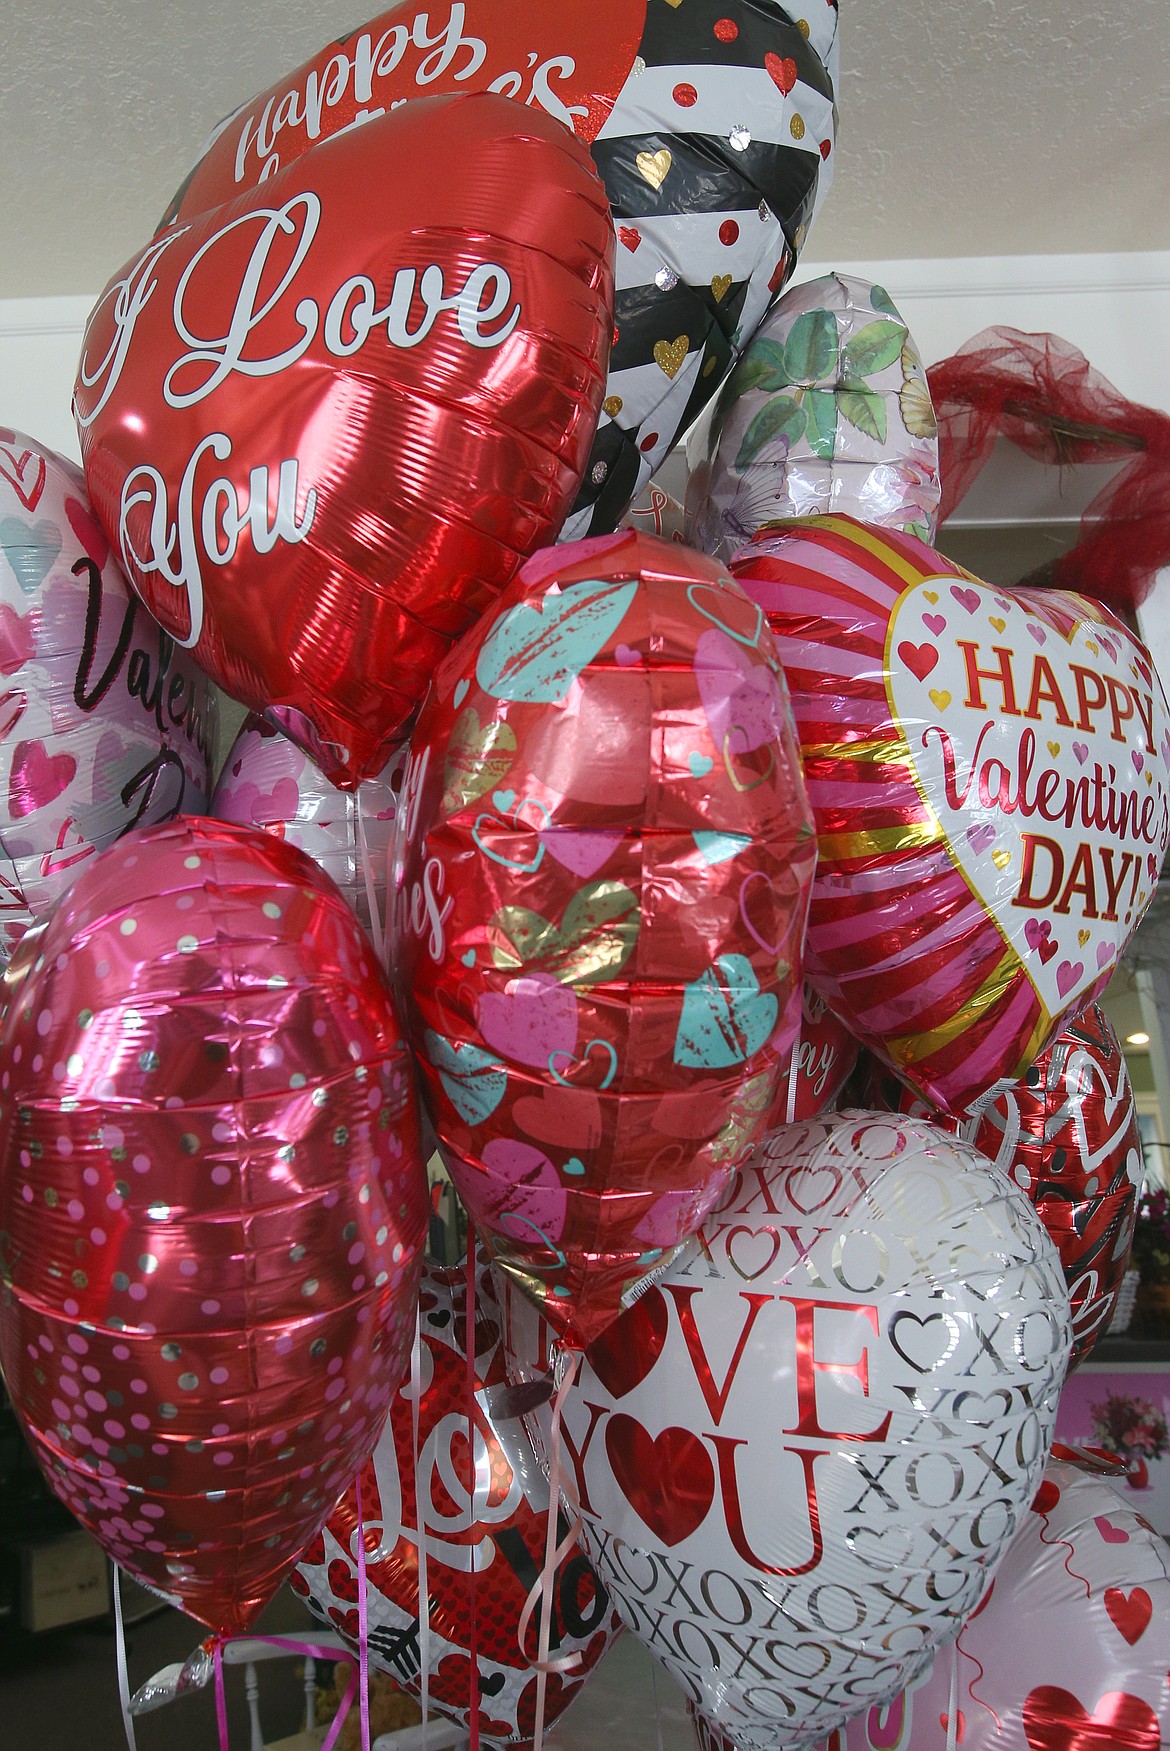 With Valentine’s Day fast approaching, customers are encouraged to order flowers and gifts as early as possible. KAYE THORNBRUGH/Press